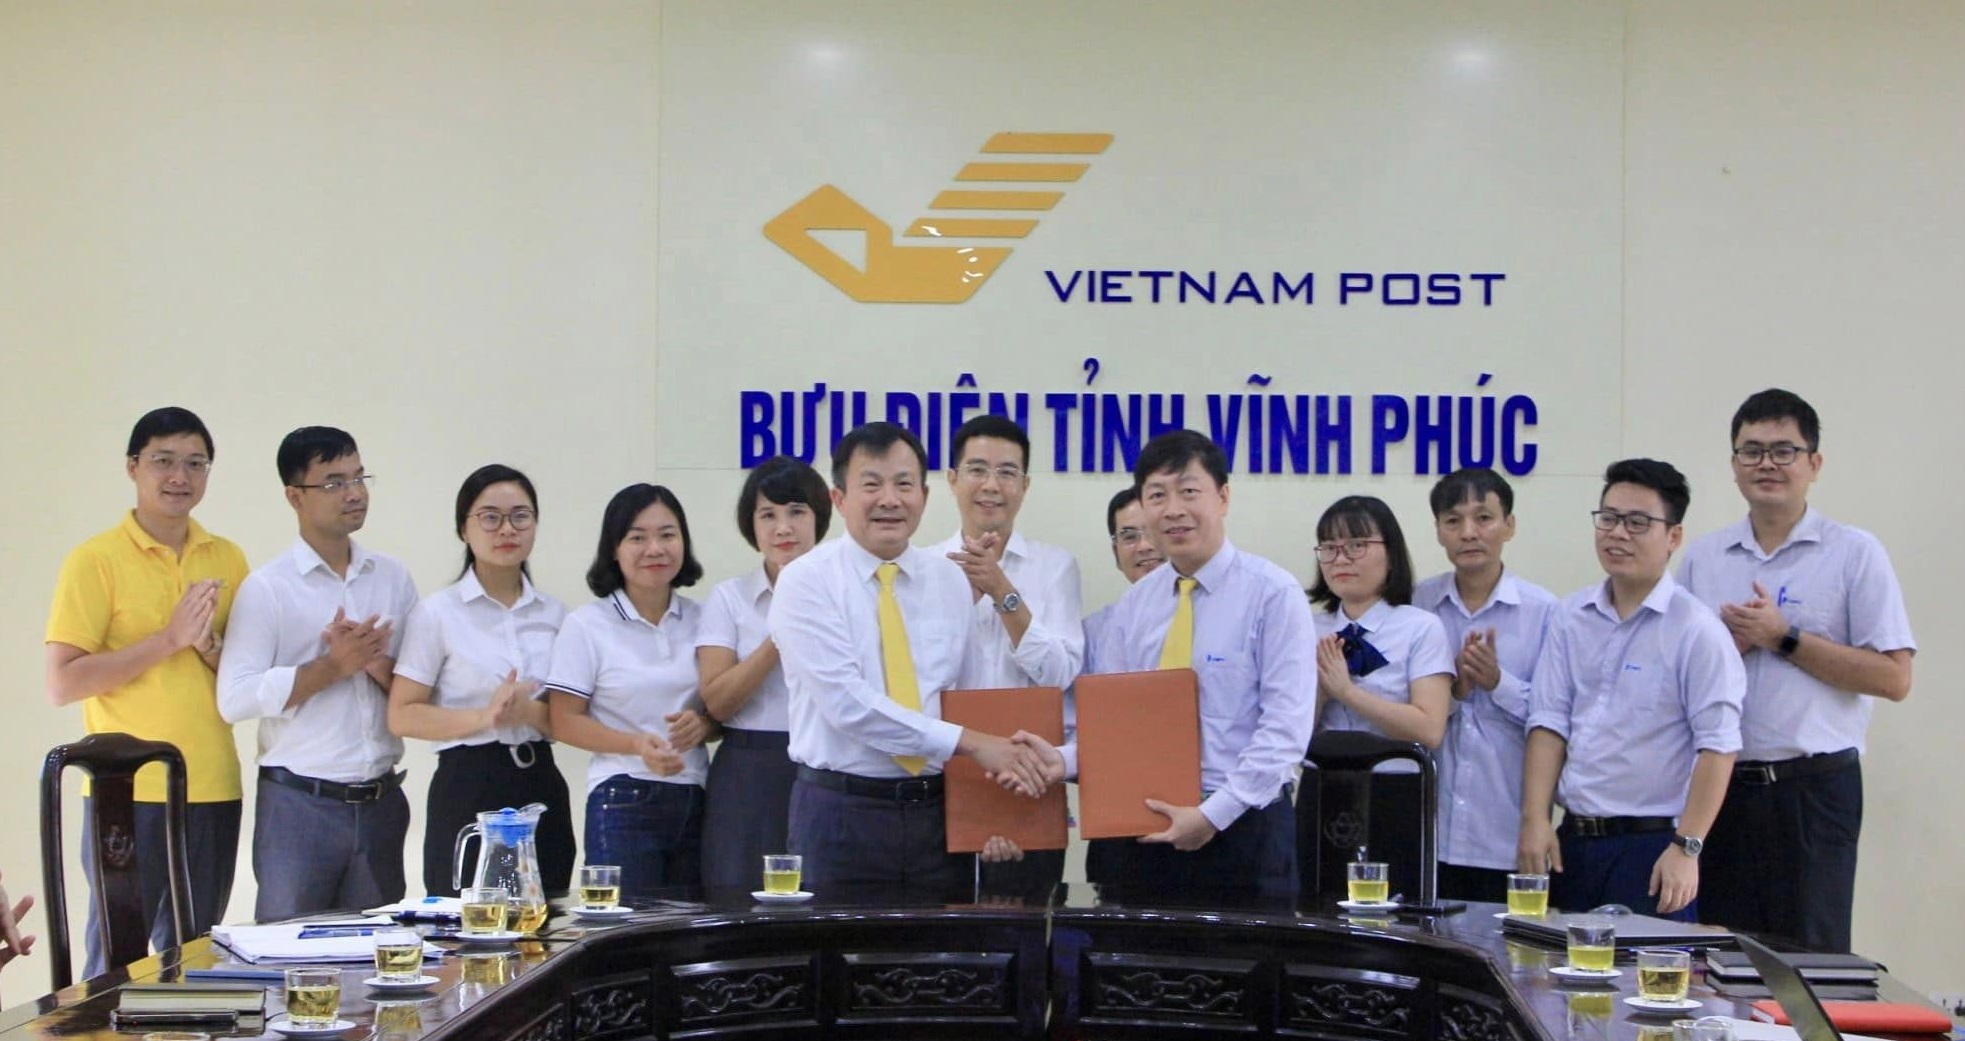 VNPT signs cooperation agreement with Vinh Phuc Provincial Post Office